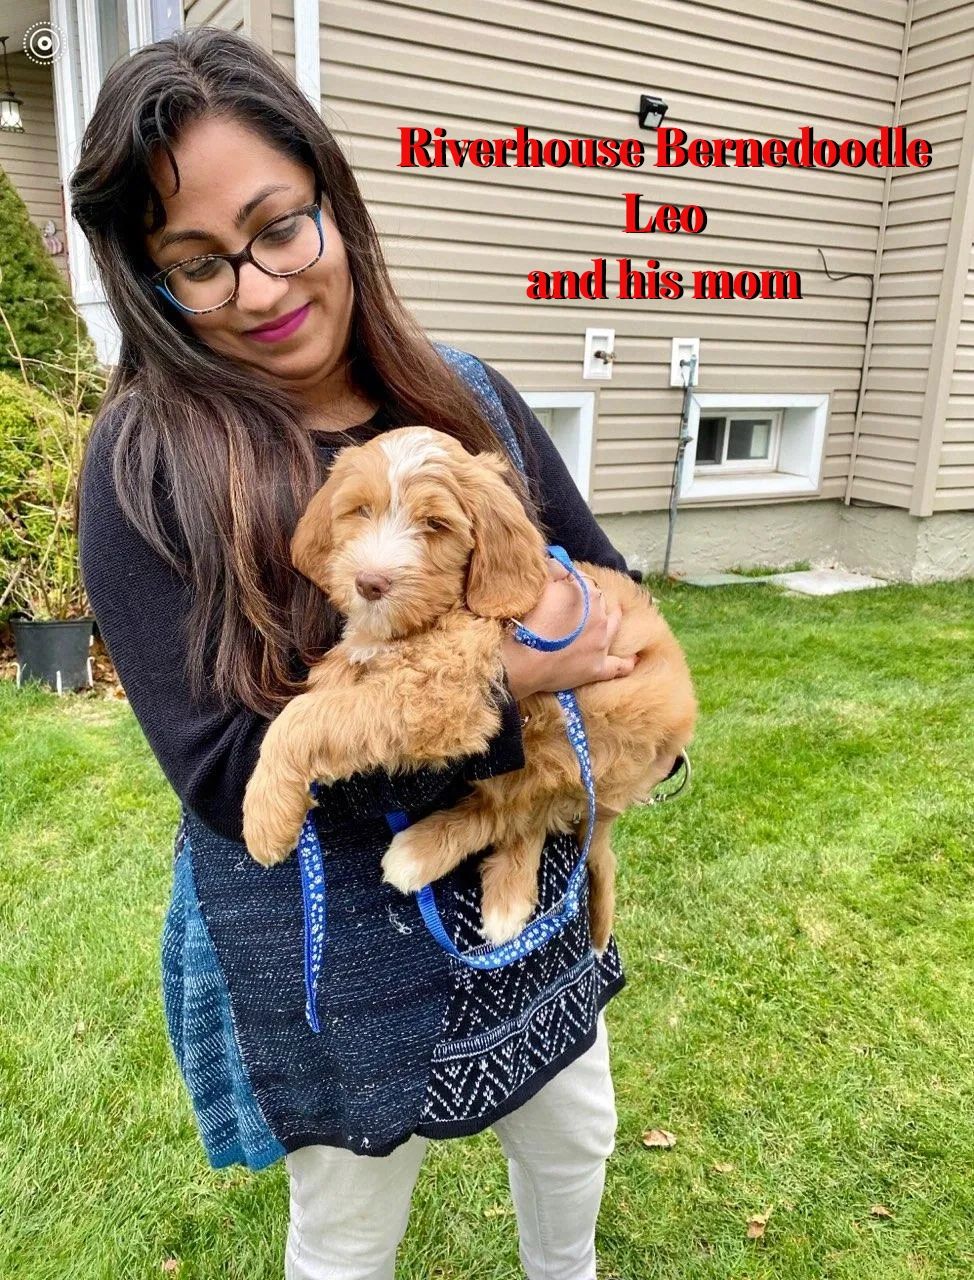 Smiling woman holding a Riverhouse Bernedoodle puppy